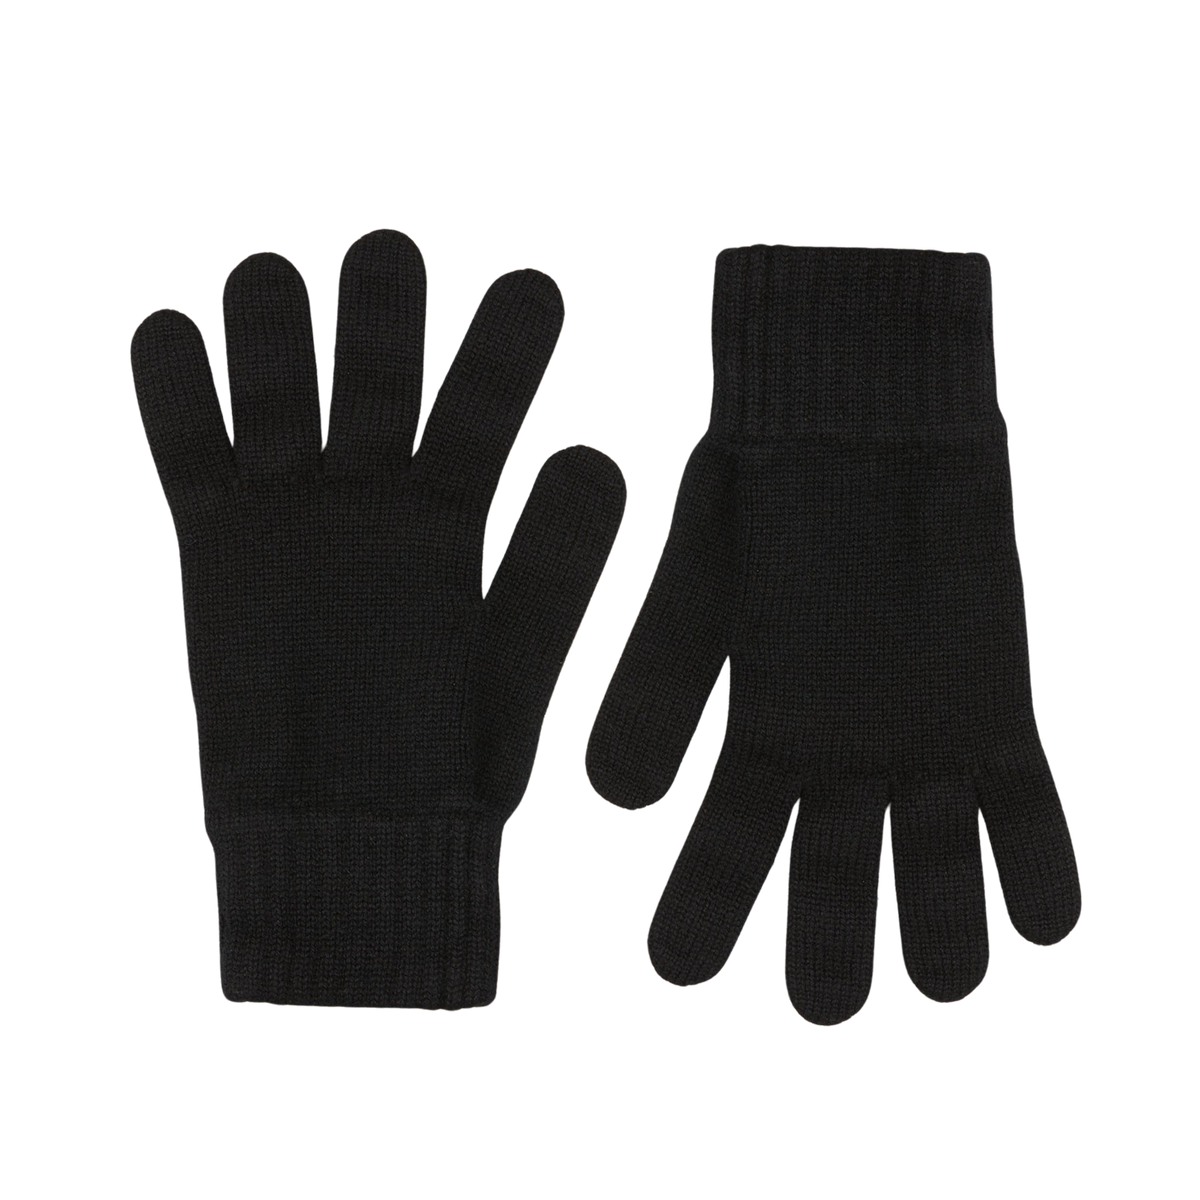 A pair of Black Pure Cashmere Gloves by William Lockie on a white surface.